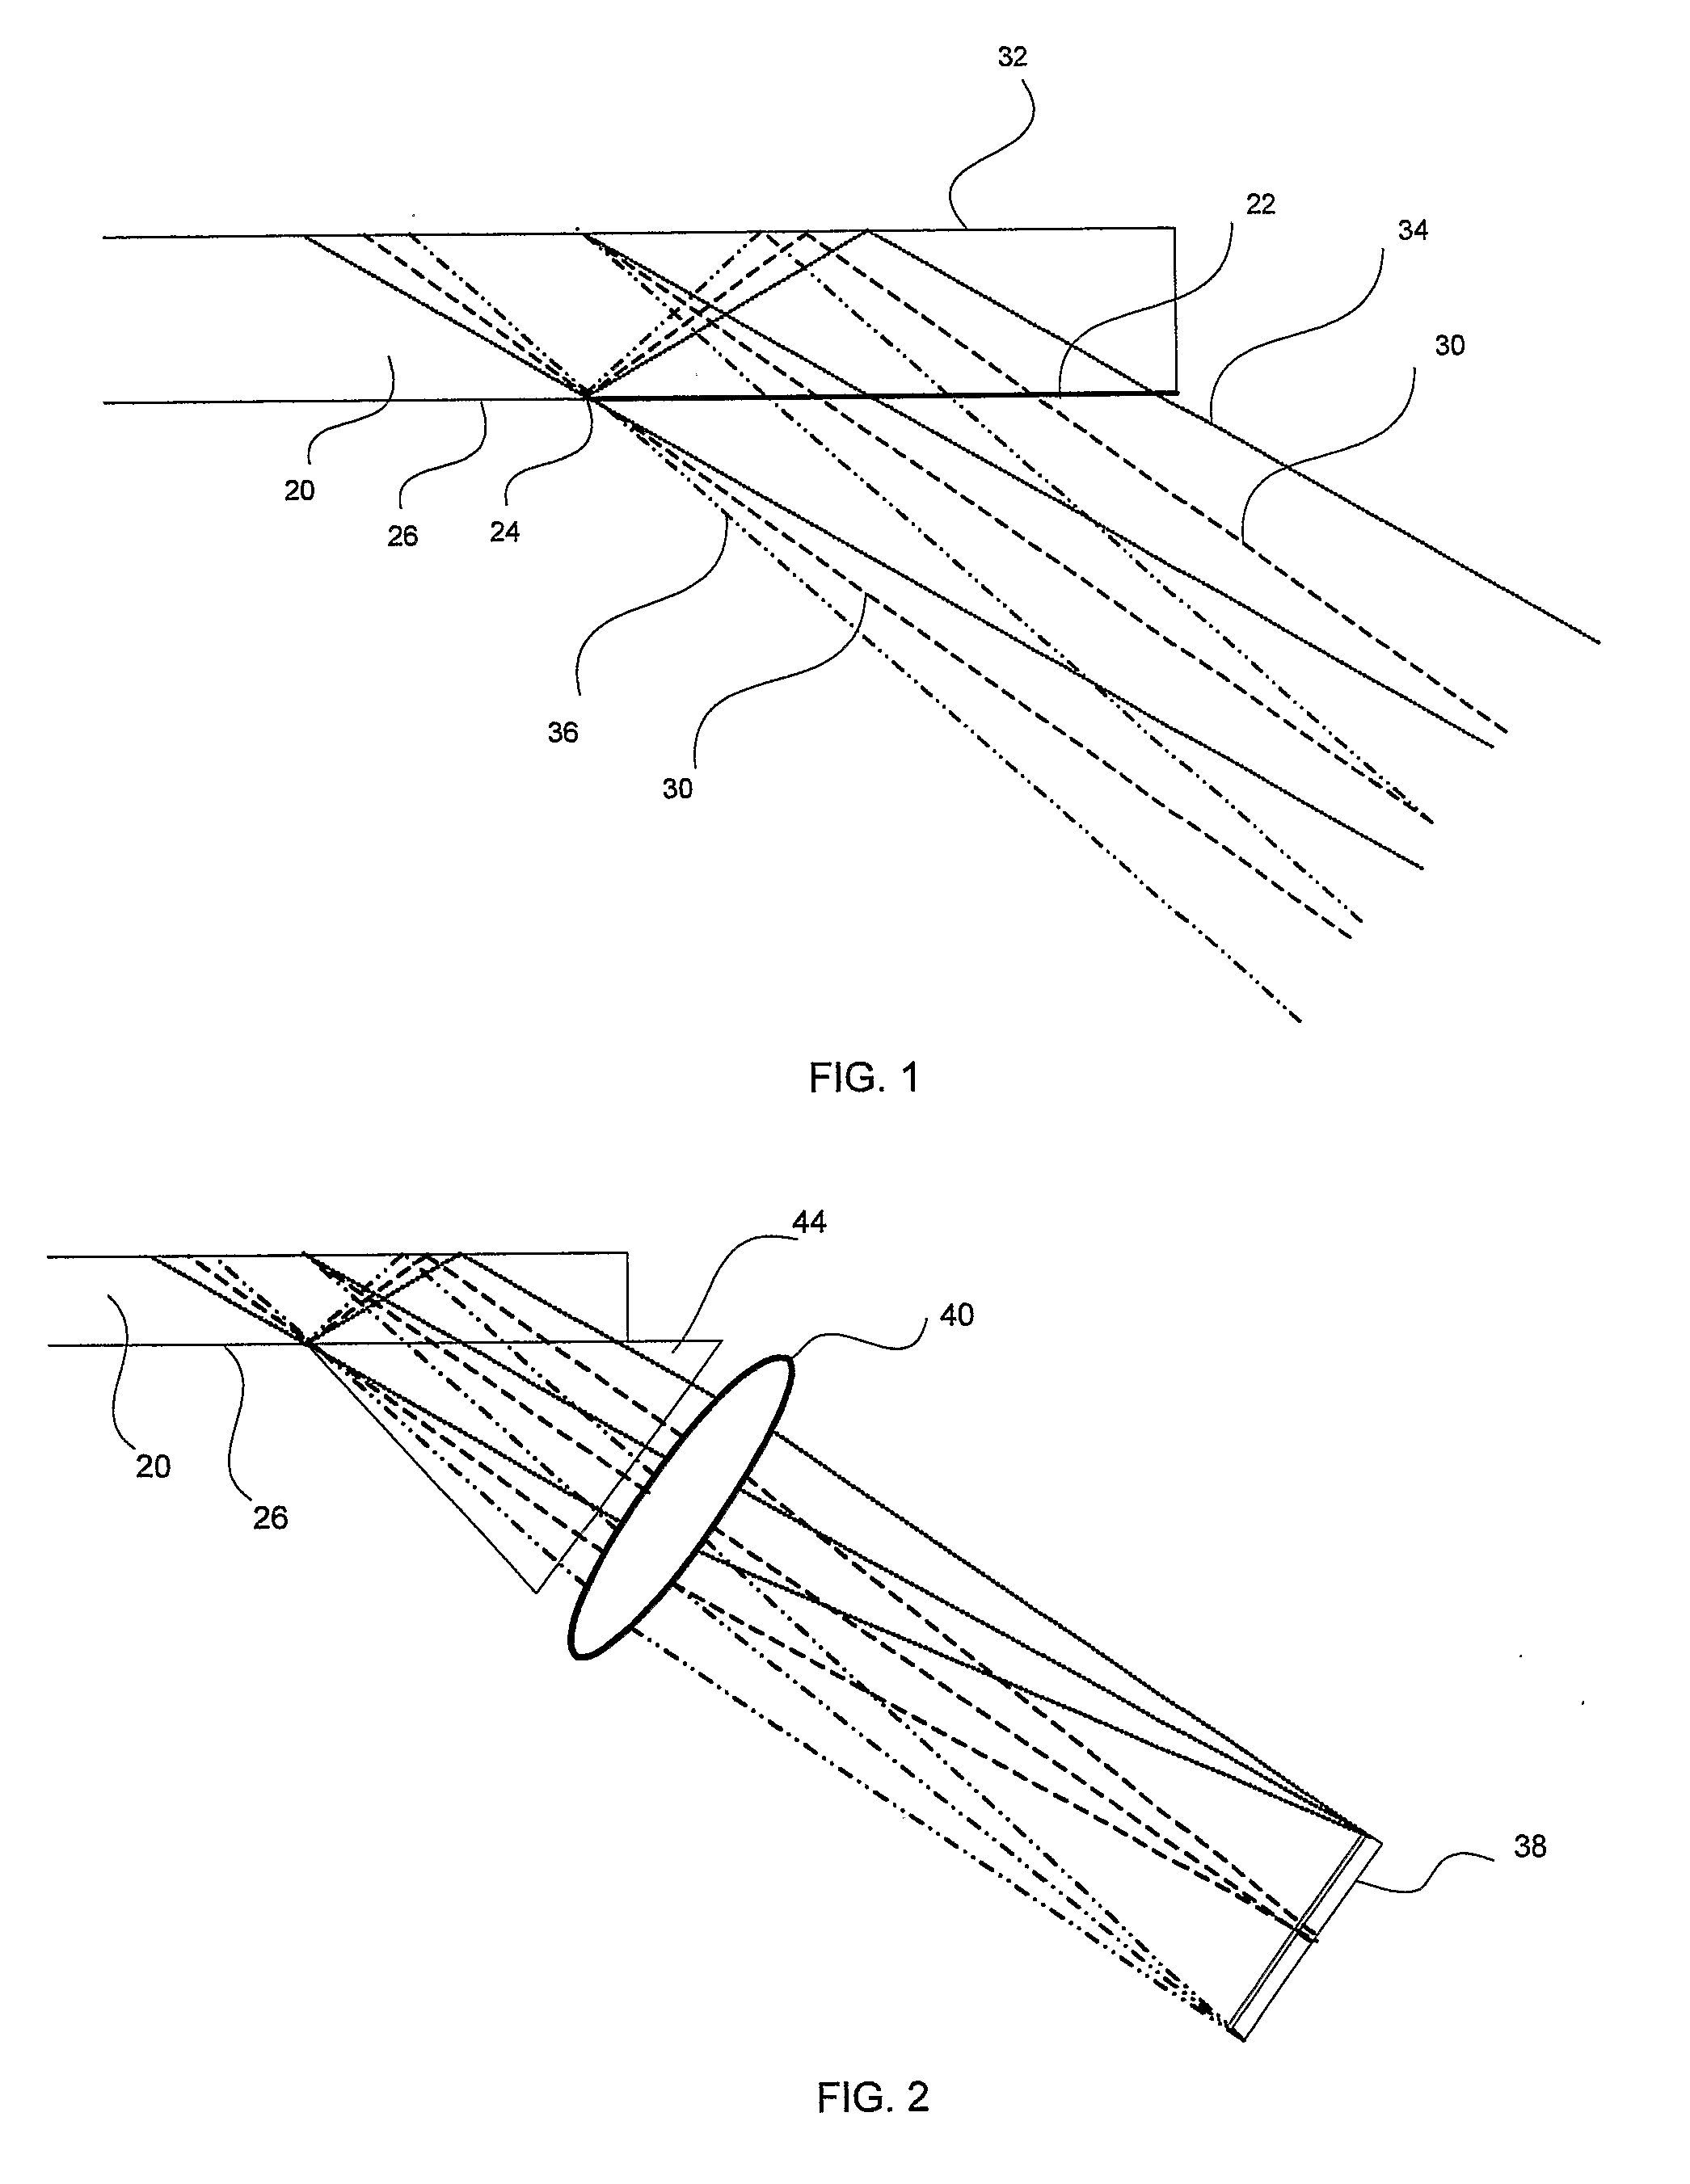 Substrate-guided optical device